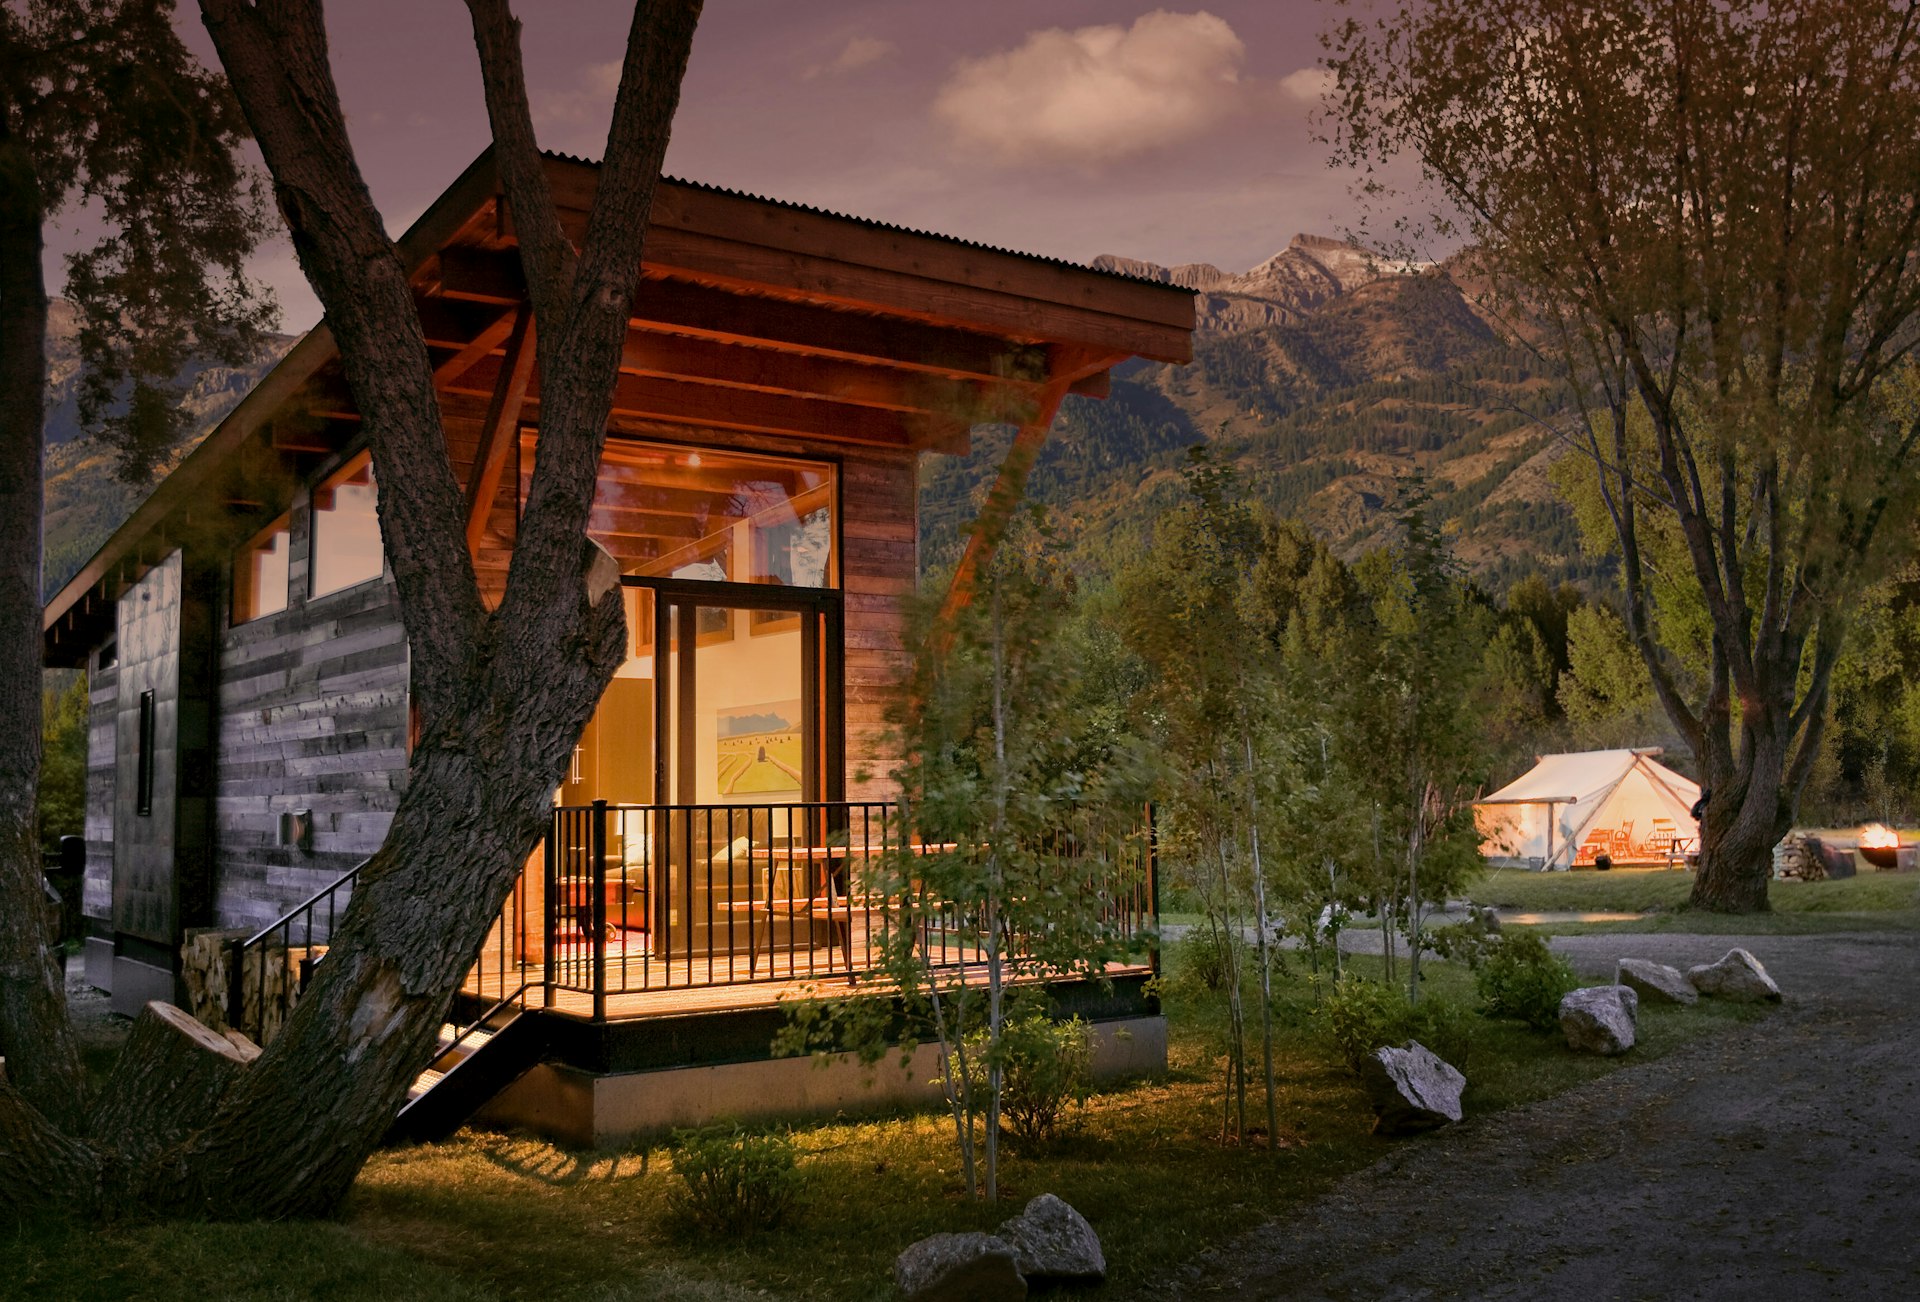 A stylish wooden cabin lit up at dusk. A large white tent is in the background. The mountains rise above the site in the distance.